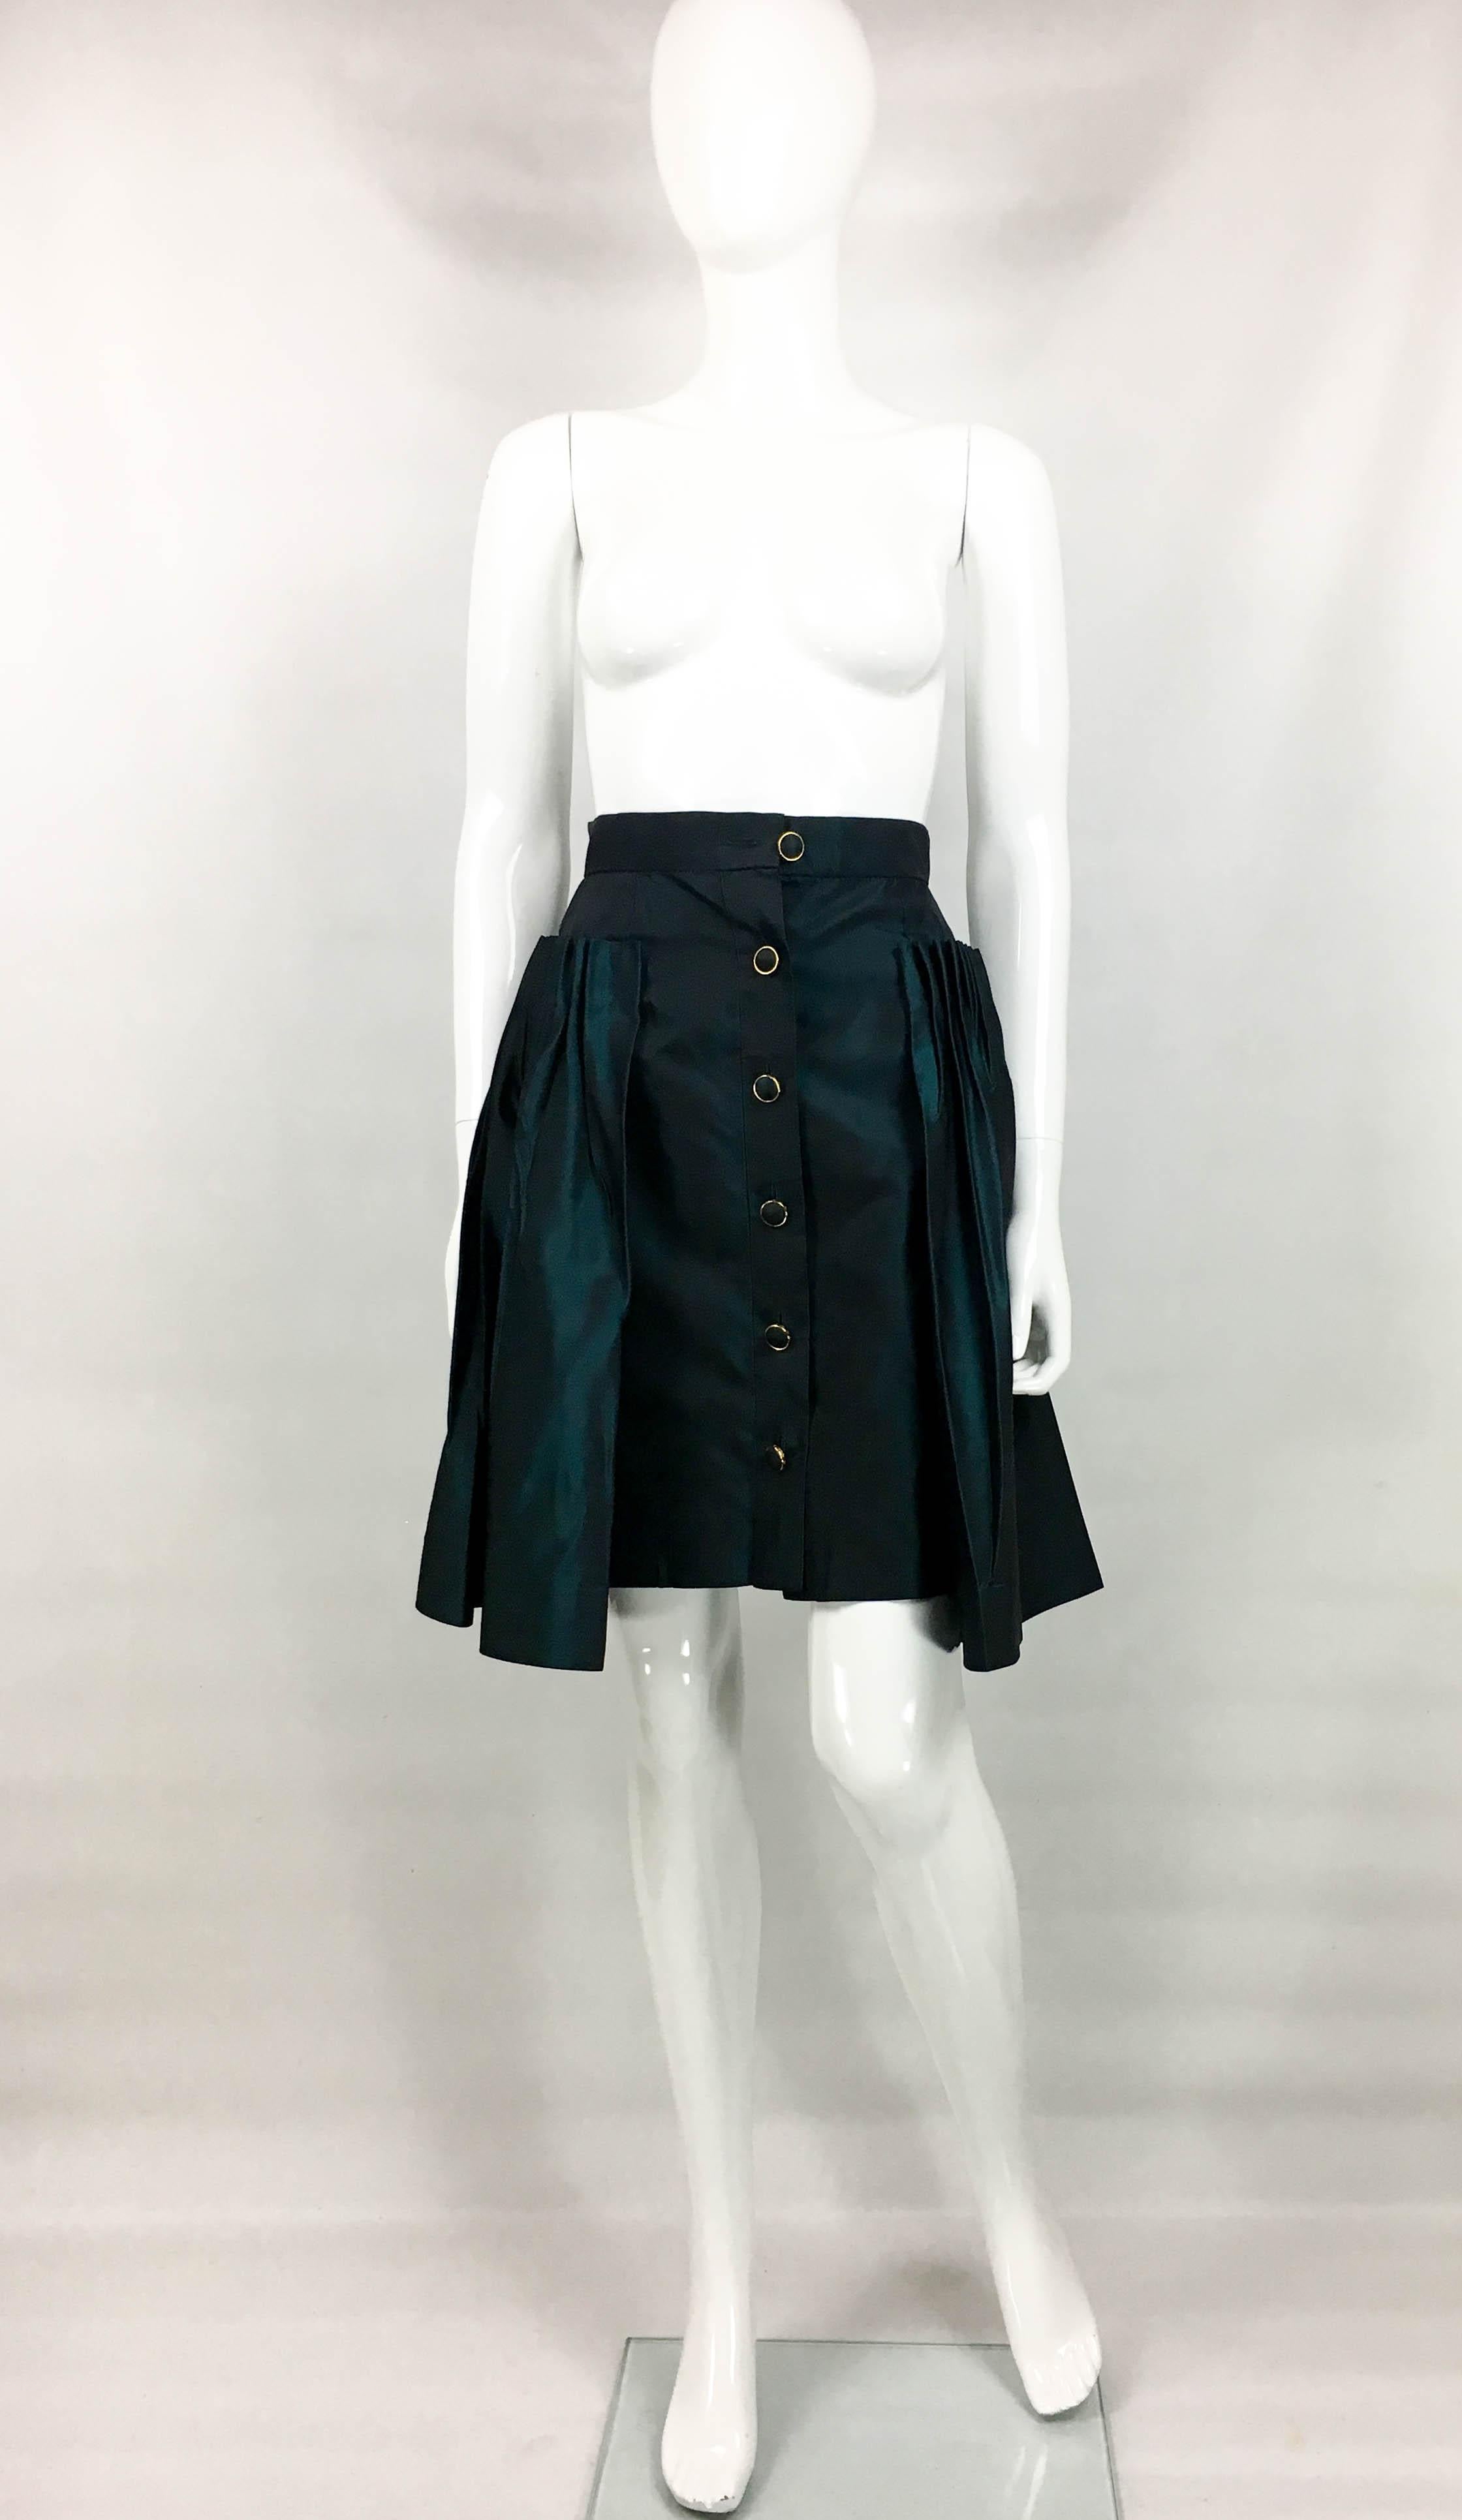 Vintage Chanel Iridescent Green Skirt. This beautiful piece by Chanel dates back from the 1990’s. Made in iridescent green silk, it has pleated volume from the hips. There are six buttons down the front. They are made in gilt metal with the centre